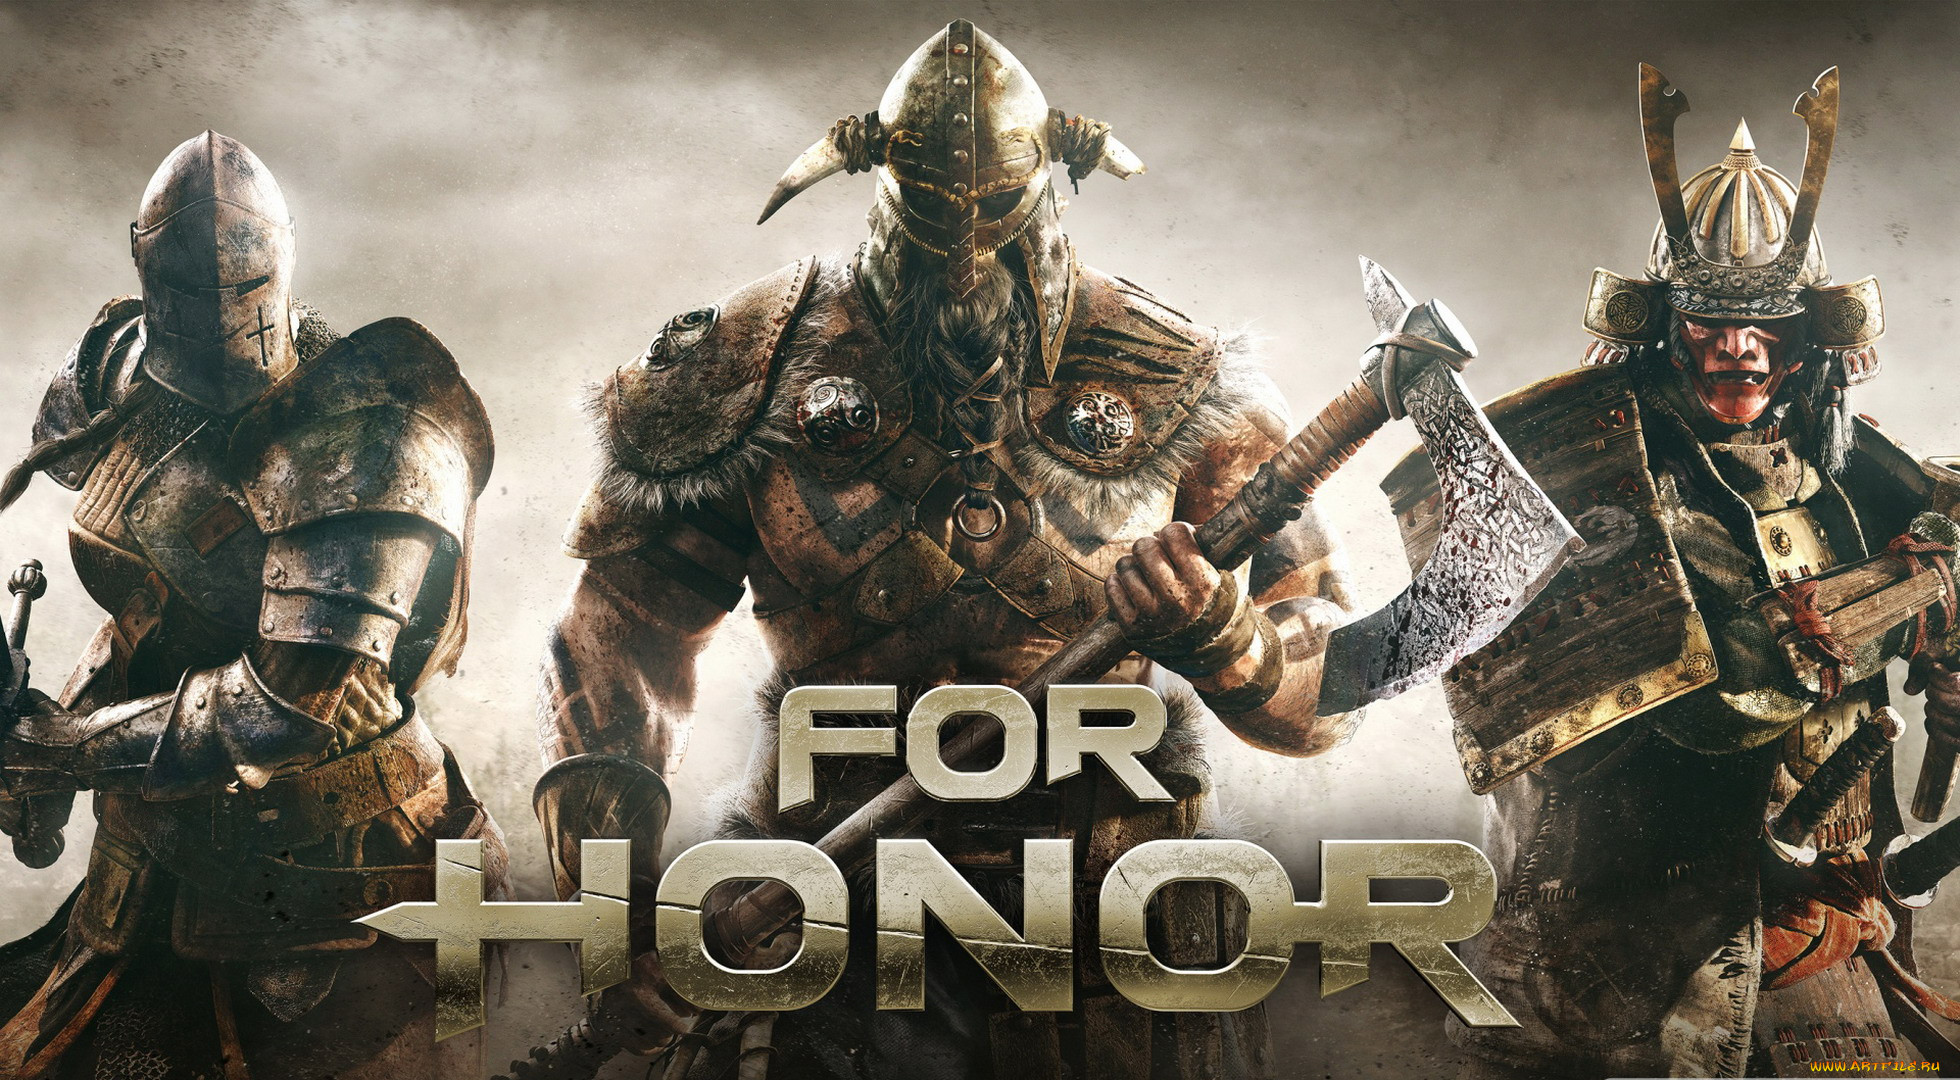  , for honor, , , , , 